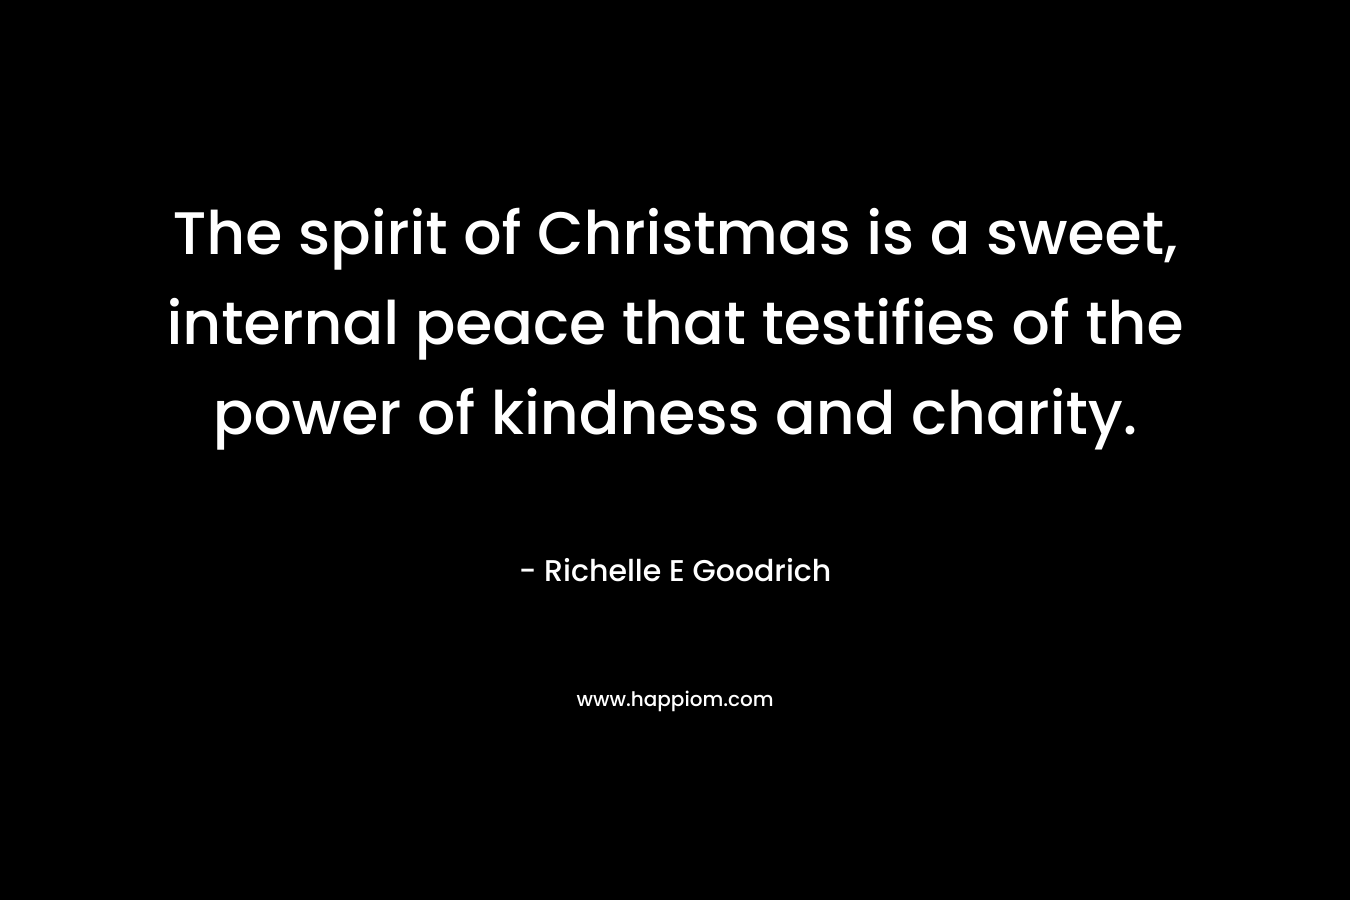 The spirit of Christmas is a sweet, internal peace that testifies of the power of kindness and charity.